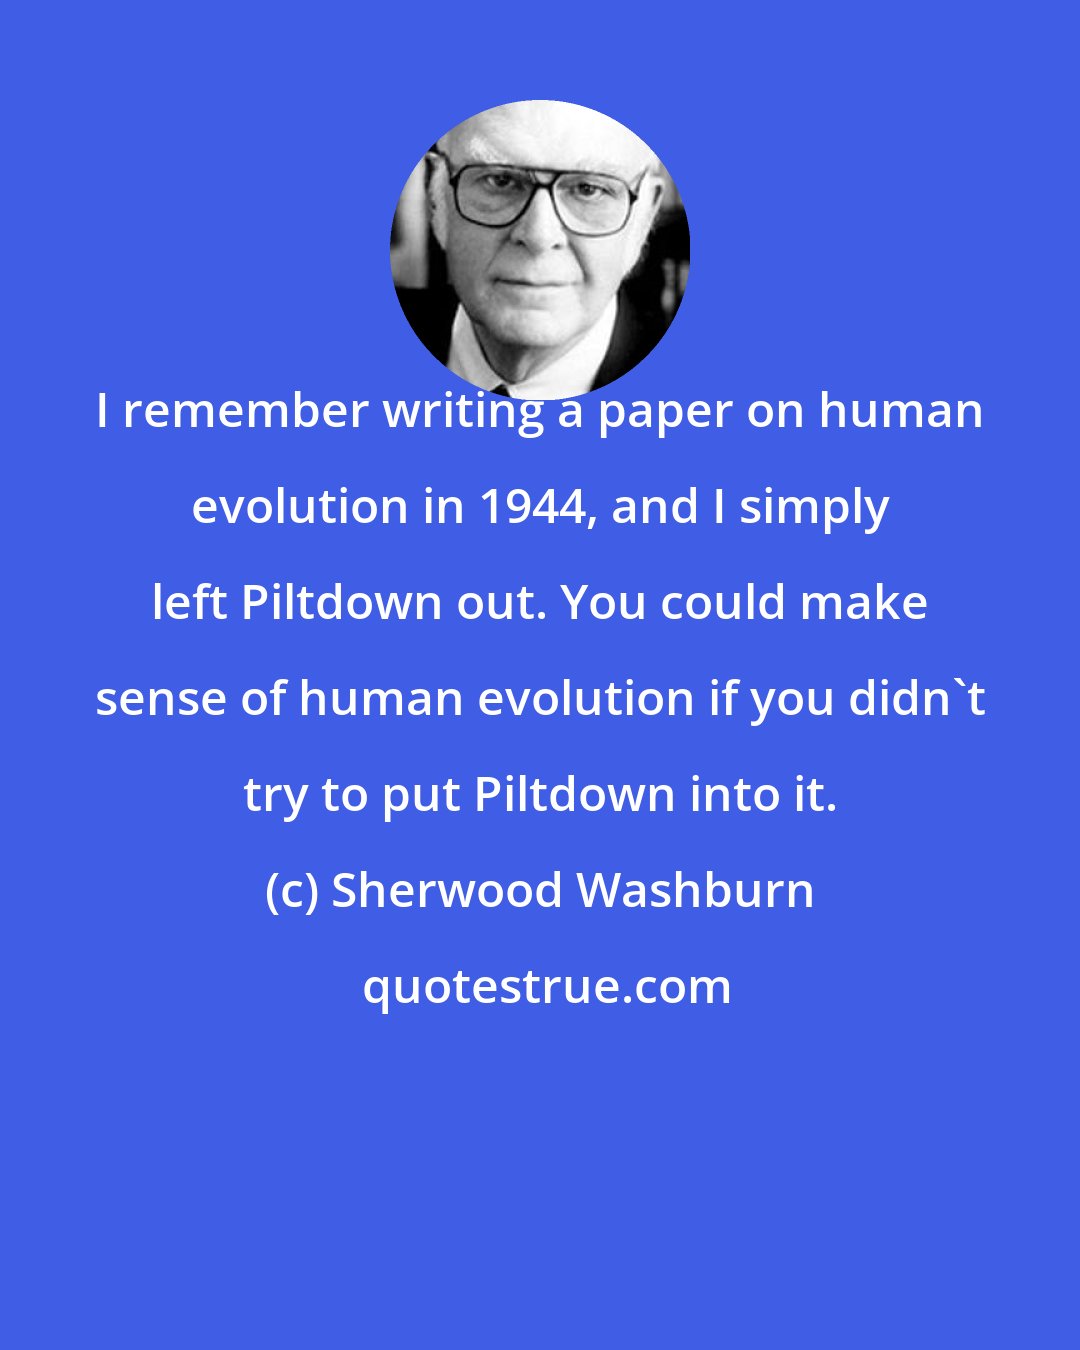 Sherwood Washburn: I remember writing a paper on human evolution in 1944, and I simply left Piltdown out. You could make sense of human evolution if you didn't try to put Piltdown into it.